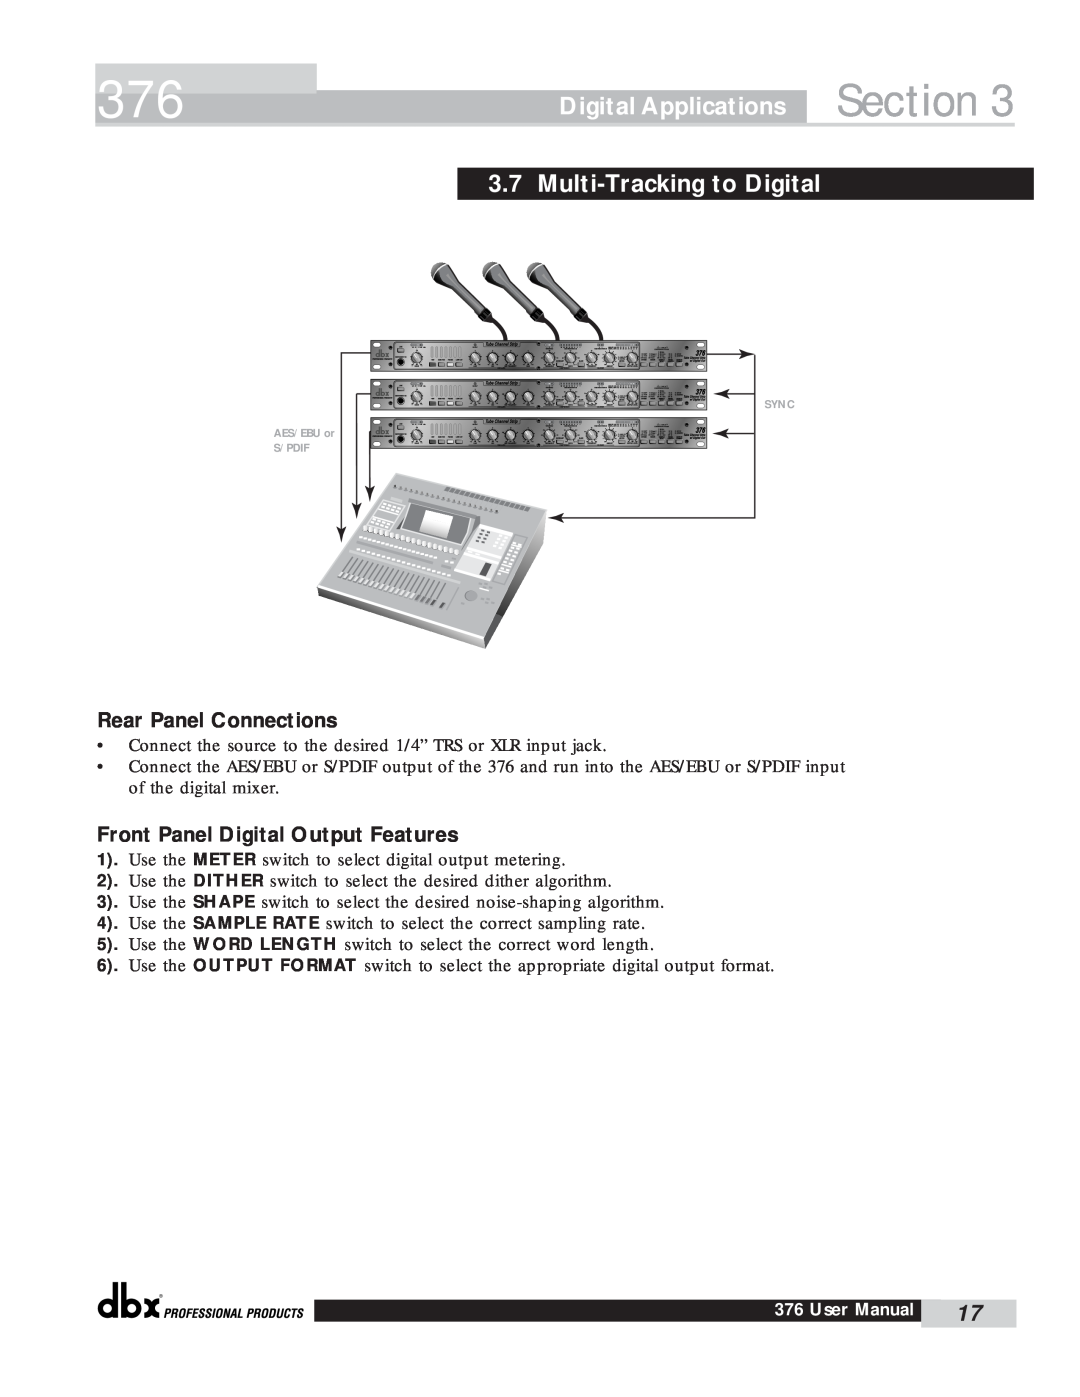 dbx Pro 376 user manual Multi-Trackingto Digital, Section, Digital Applications, Rear Panel Connections 